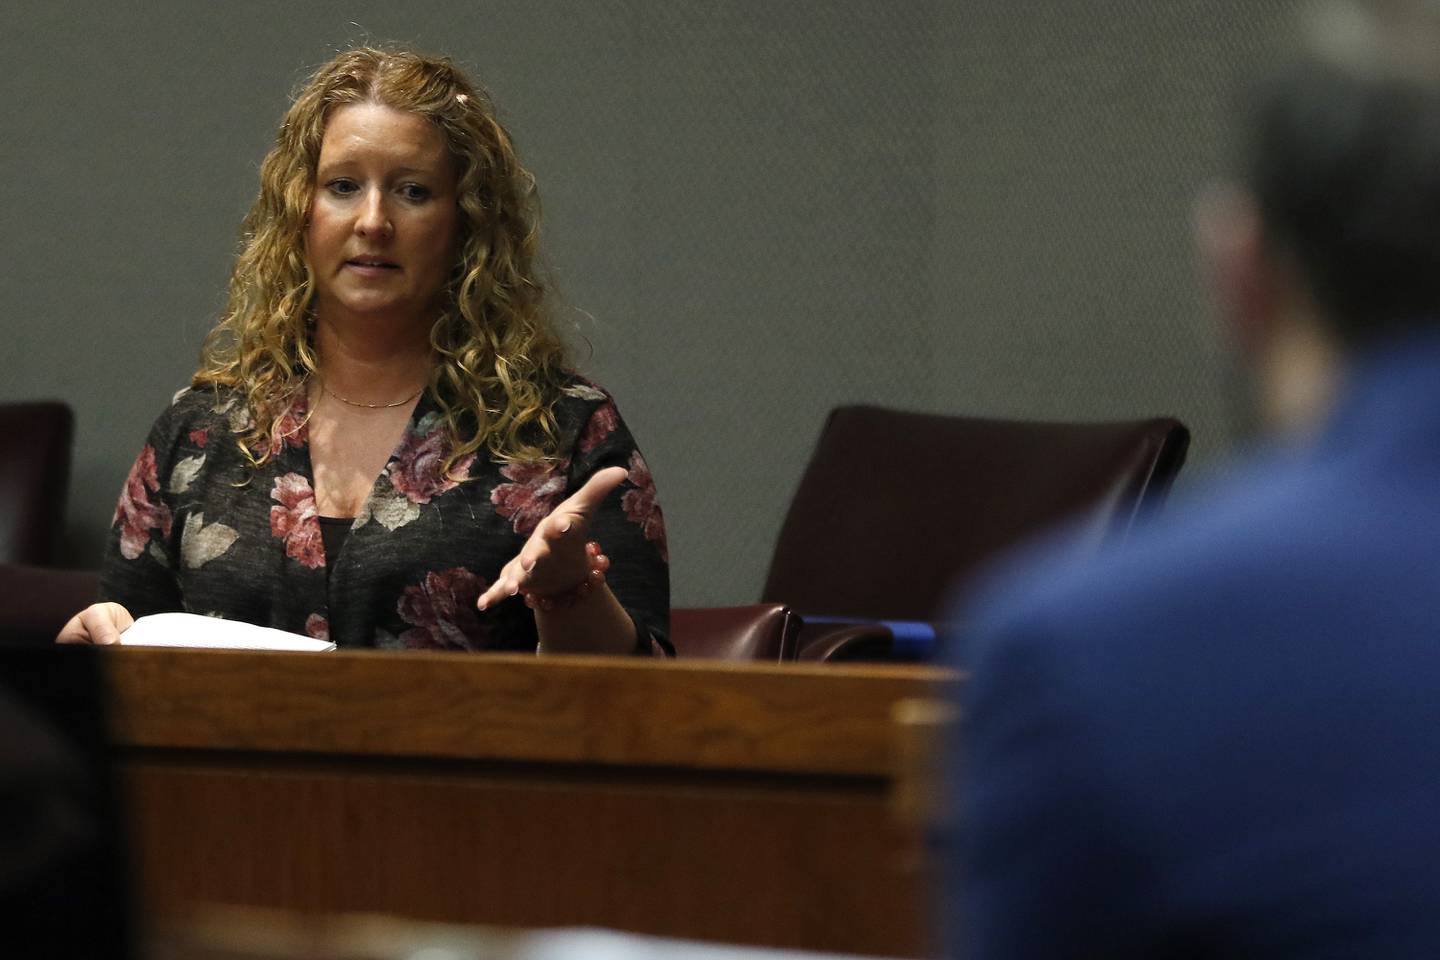 Bethany Austin gives testimony under oath in court with defense attorneys Igor Bozic and Wayne Giampietro inside Judge Michael Coppedge's courtroom at the Michael J. Sullivan Judicial Center on Friday, April 23, 2021, in Woodstock.